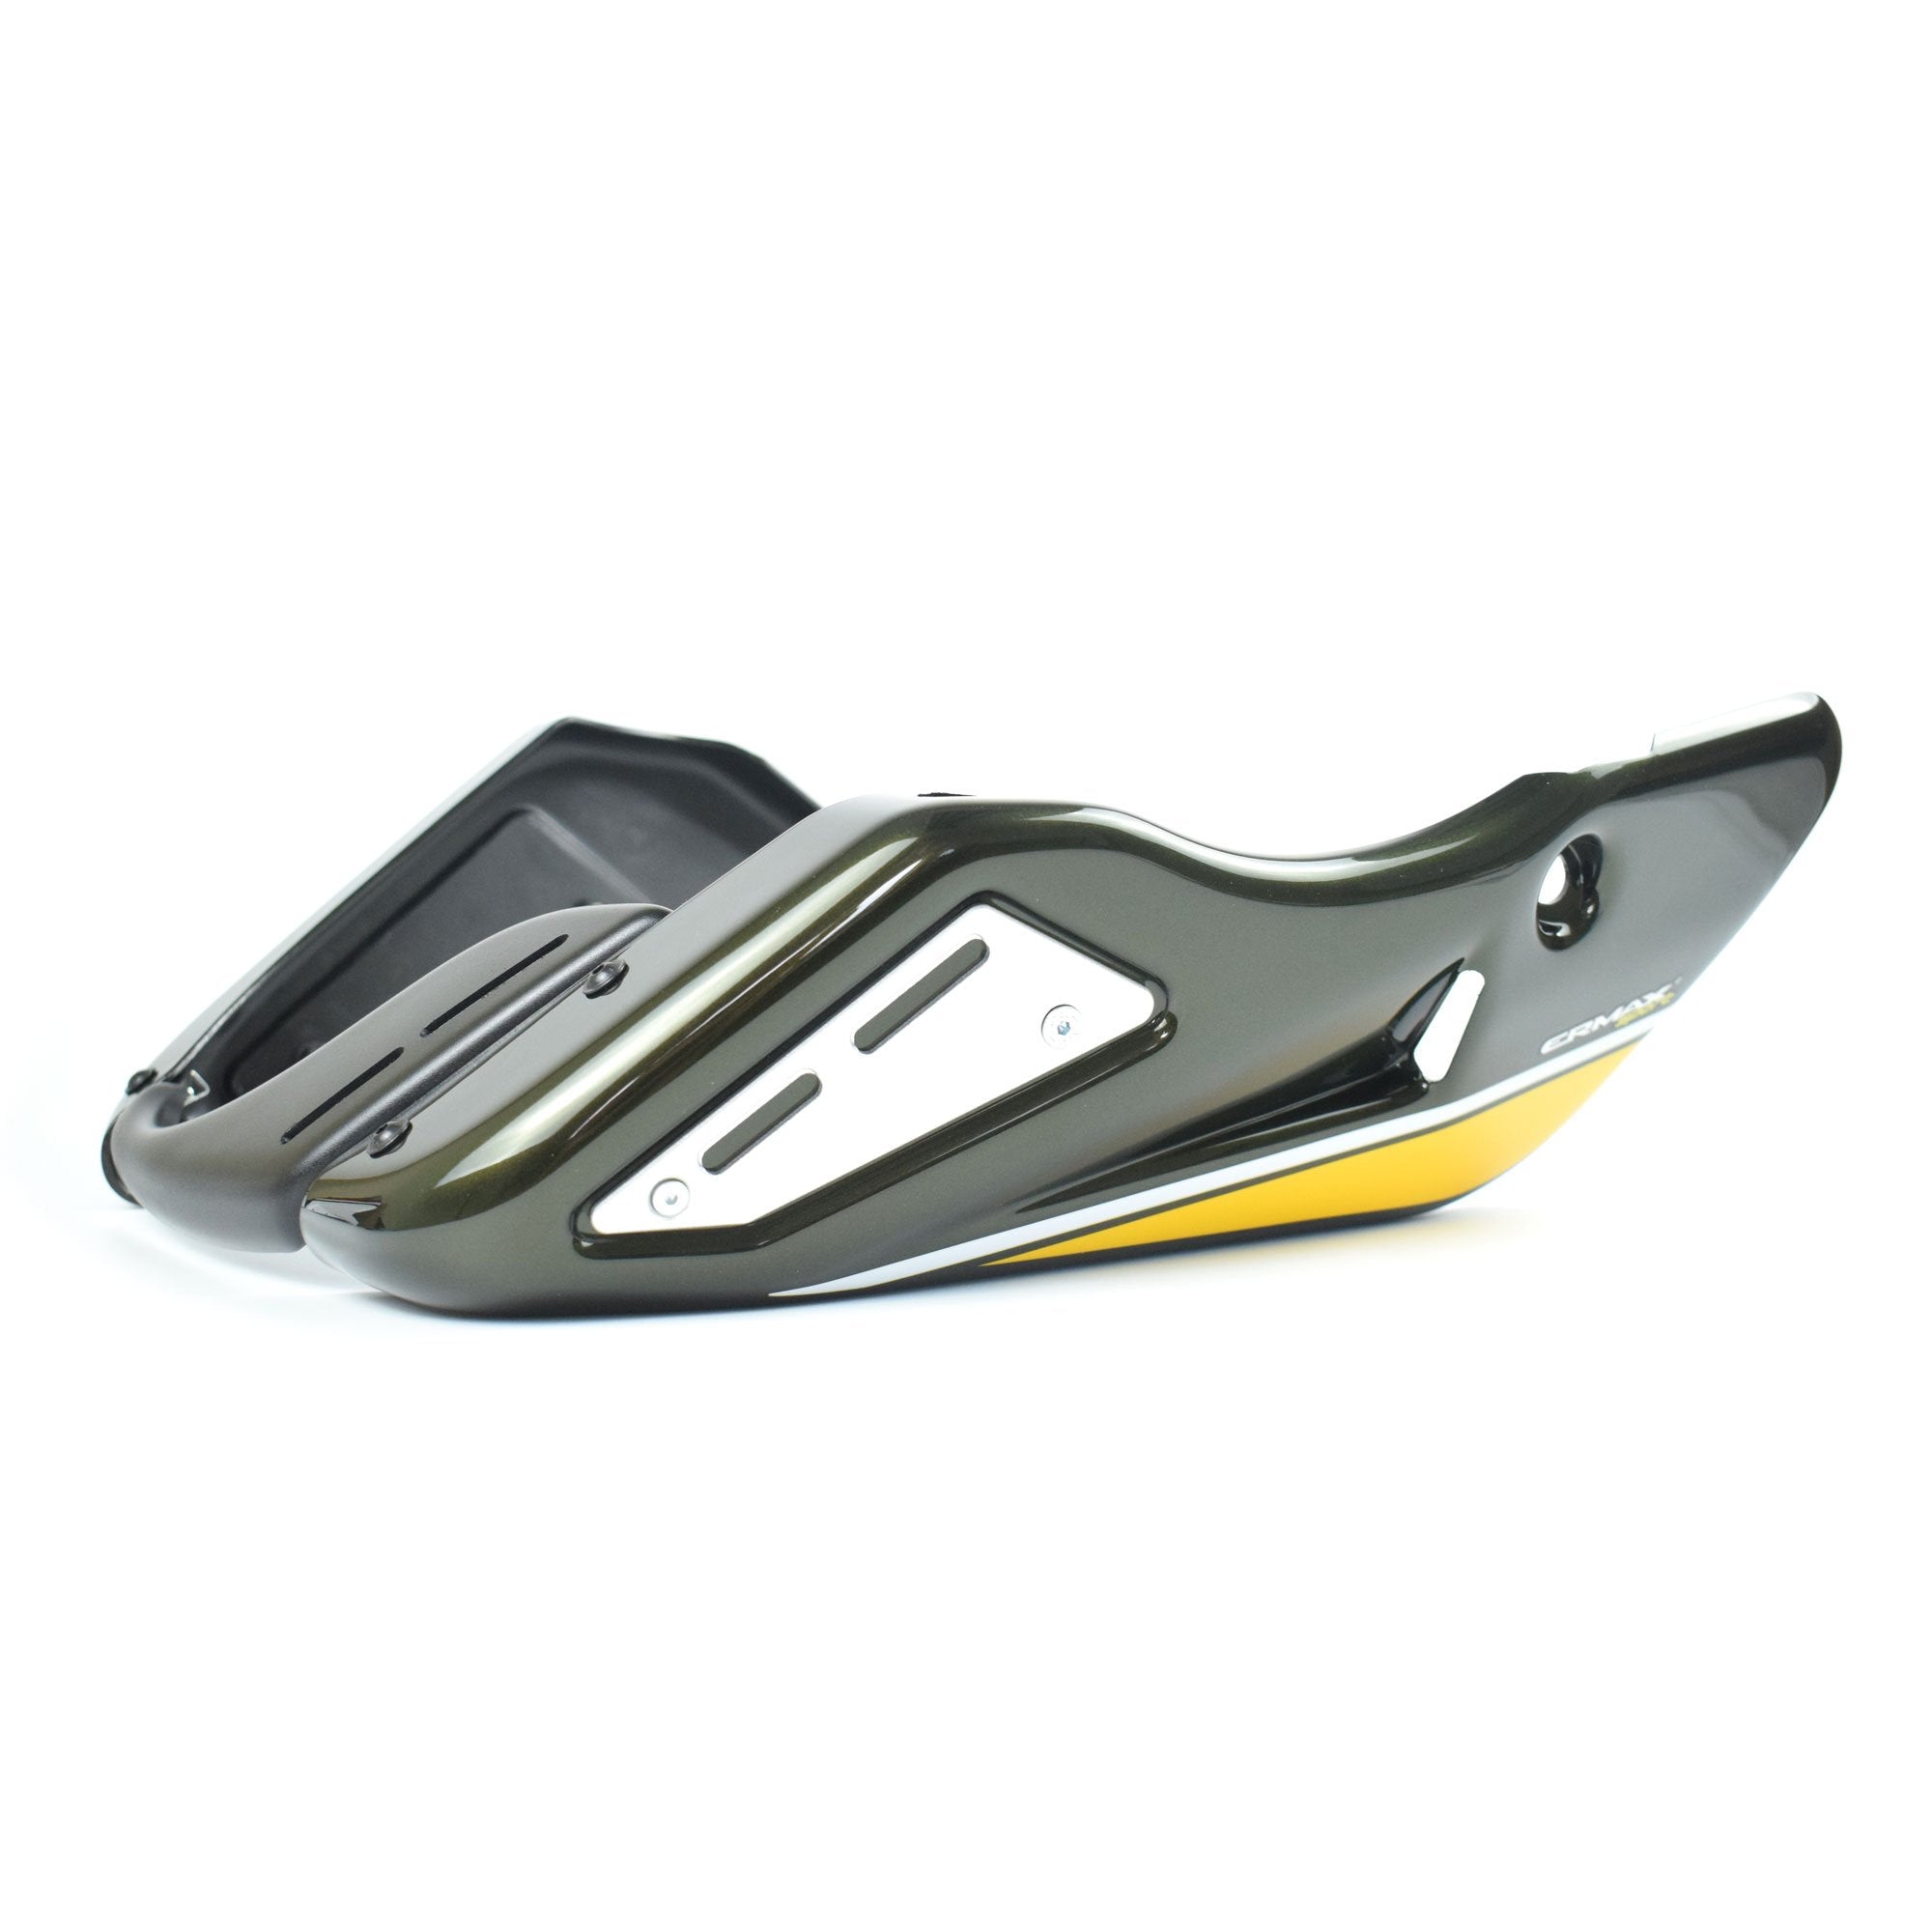 Ermax Belly Pan | Met Green (Candytone Green/Yellow/Black) | Kawasaki Z 900 RS 2017>Current-E8903S68-CG-Belly Pans-Pyramid Motorcycle Accessories